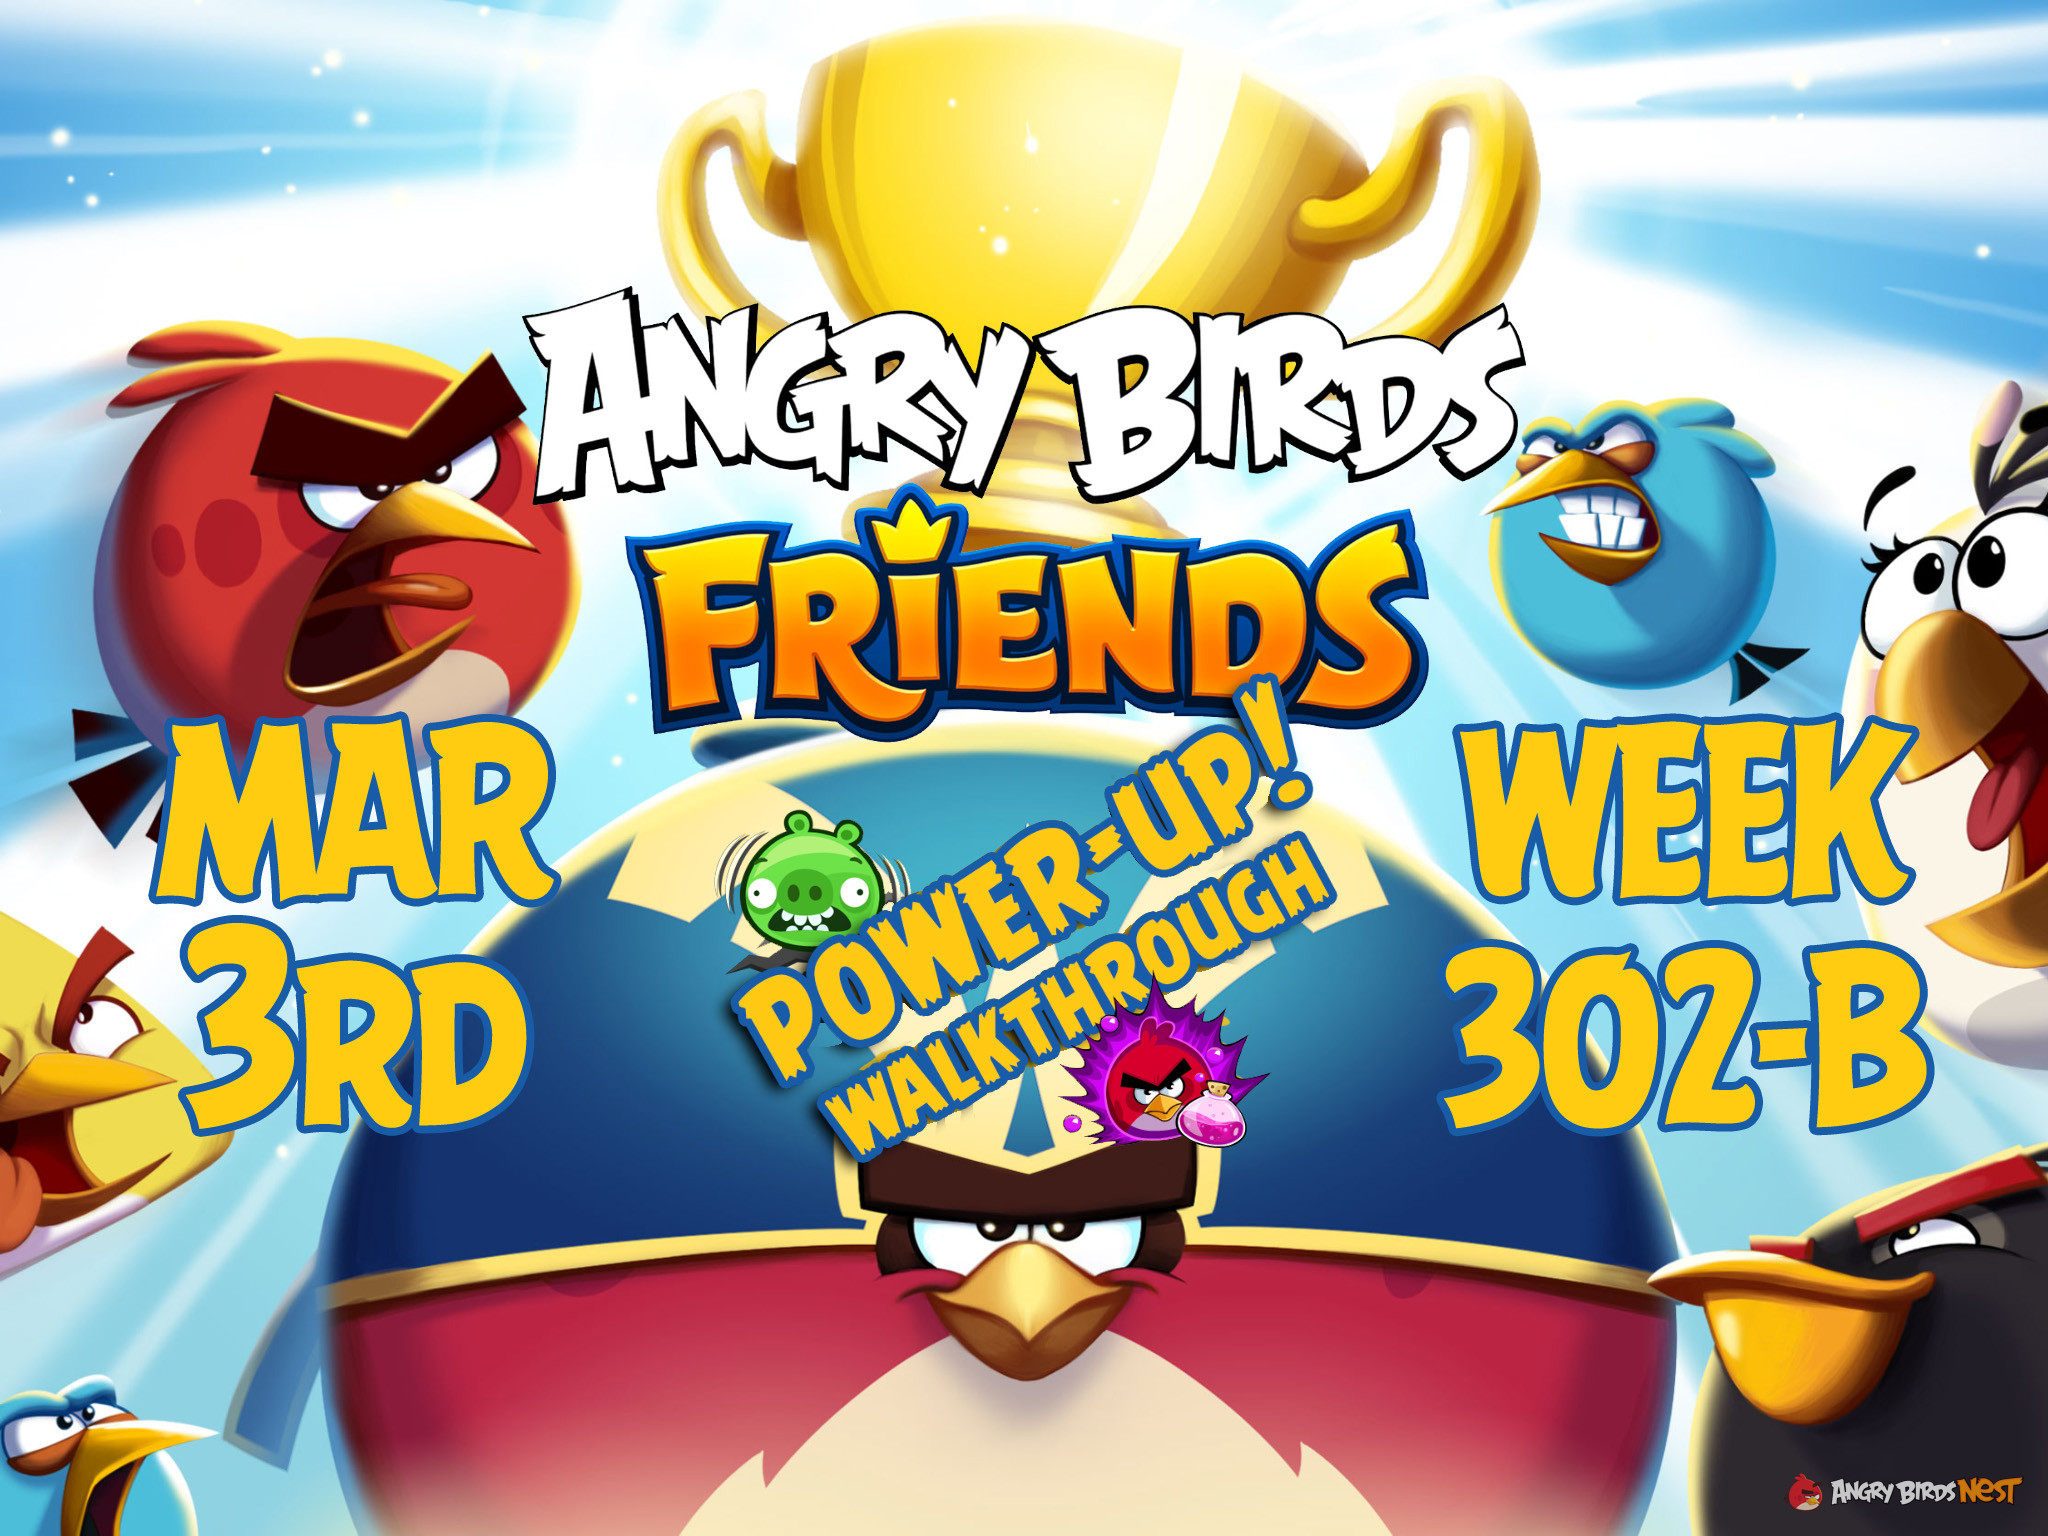 Angry Birds Friends Tournament Week 302-B Feature Image PU